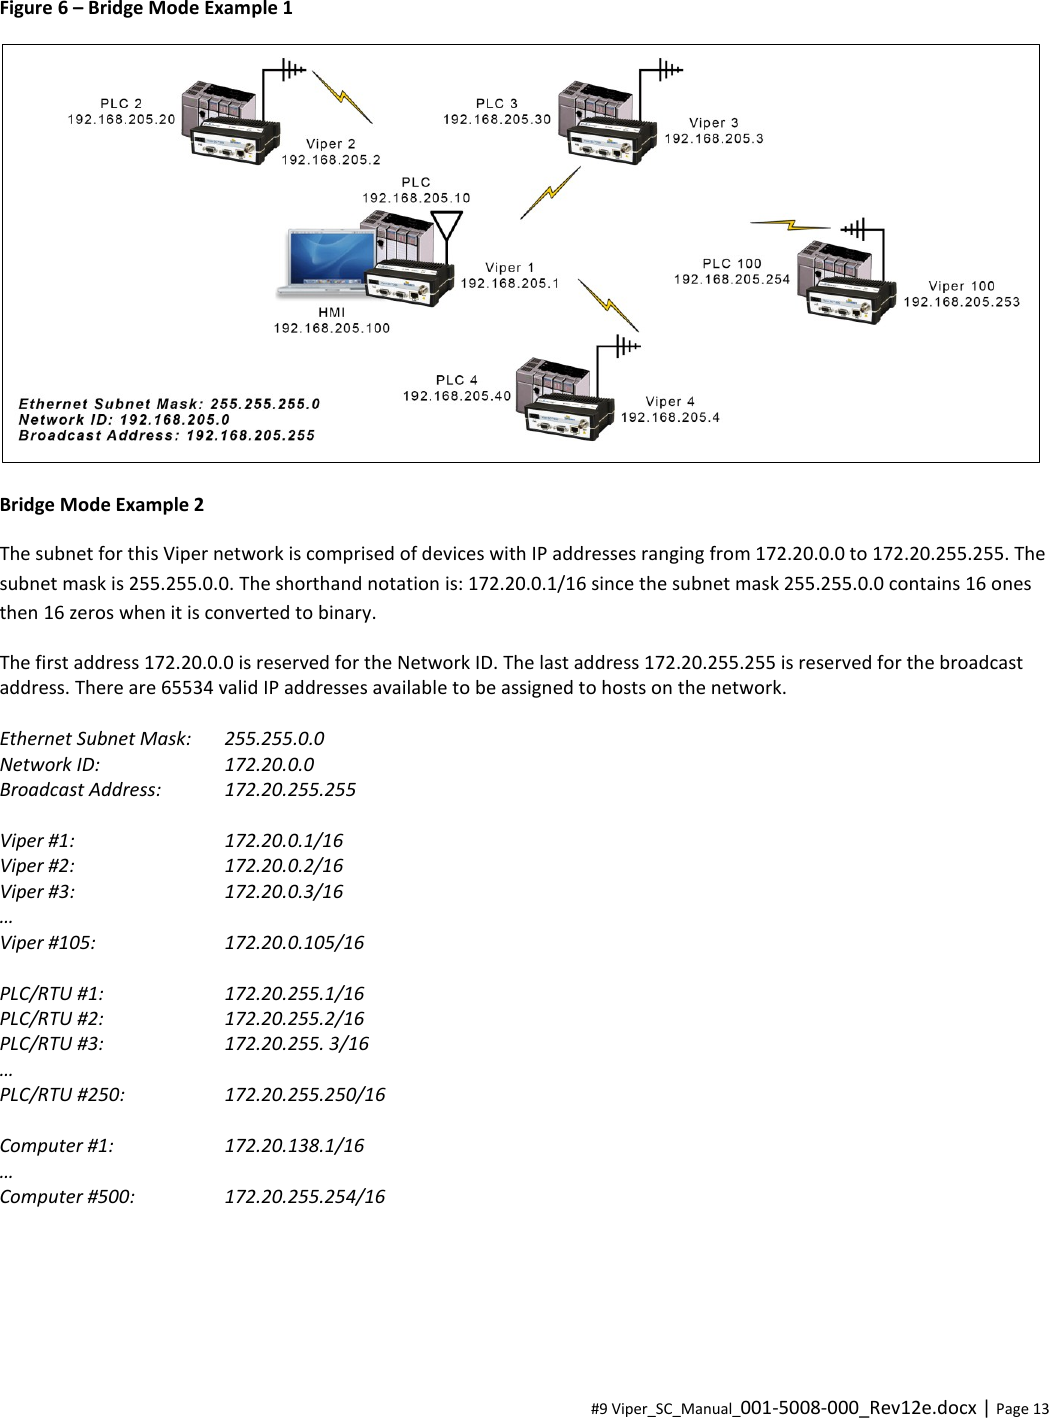  #9 Viper_SC_Manual_001-5008-000_Rev12e.docx | Page 13 Figure 6 – Bridge Mode Example 1  Bridge Mode Example 2 The subnet for this Viper network is comprised of devices with IP addresses ranging from 172.20.0.0 to 172.20.255.255. The subnet mask is 255.255.0.0. The shorthand notation is: 172.20.0.1/16 since the subnet mask 255.255.0.0 contains 16 ones then 16 zeros when it is converted to binary. The first address 172.20.0.0 is reserved for the Network ID. The last address 172.20.255.255 is reserved for the broadcast address. There are 65534 valid IP addresses available to be assigned to hosts on the network.  Ethernet Subnet Mask:   255.255.0.0 Network ID:     172.20.0.0 Broadcast Address:   172.20.255.255  Viper #1:     172.20.0.1/16 Viper #2:     172.20.0.2/16 Viper #3:     172.20.0.3/16 … Viper #105:     172.20.0.105/16  PLC/RTU #1:    172.20.255.1/16 PLC/RTU #2:    172.20.255.2/16 PLC/RTU #3:    172.20.255. 3/16 …  PLC/RTU #250:    172.20.255.250/16  Computer #1:    172.20.138.1/16 …  Computer #500:     172.20.255.254/16     